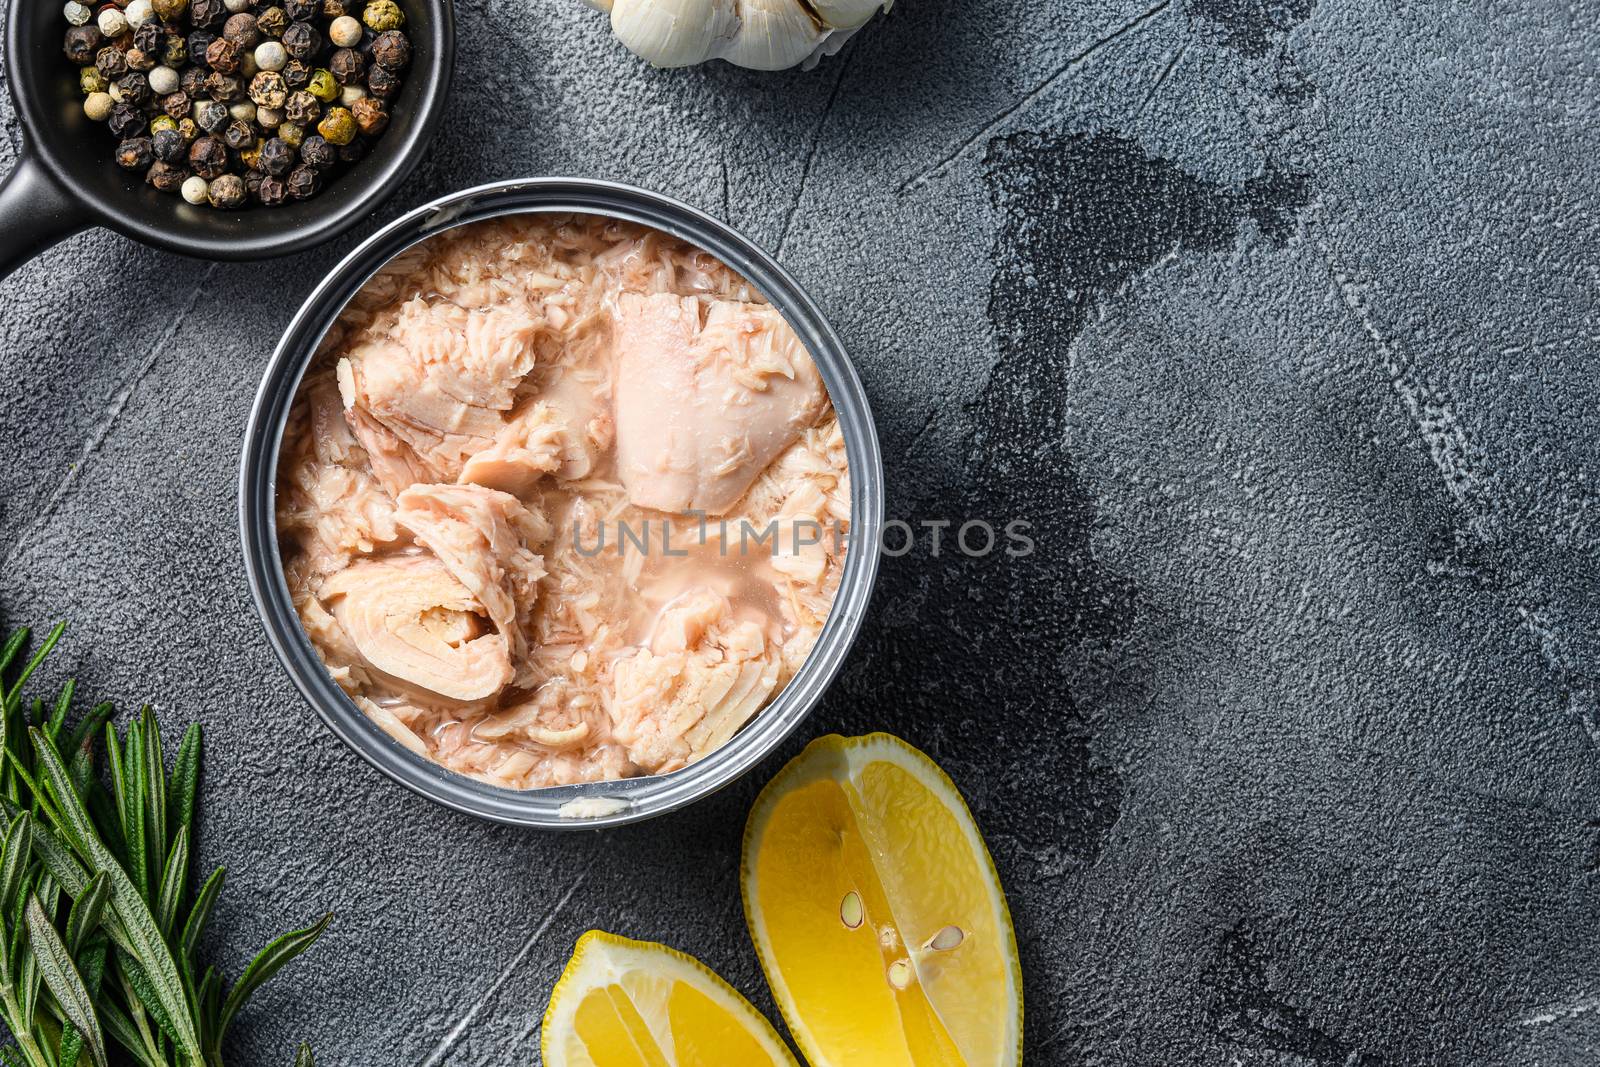 canned tuna open can with fresh herbs garlic and lemon ingredients for preservs top view close up space for text